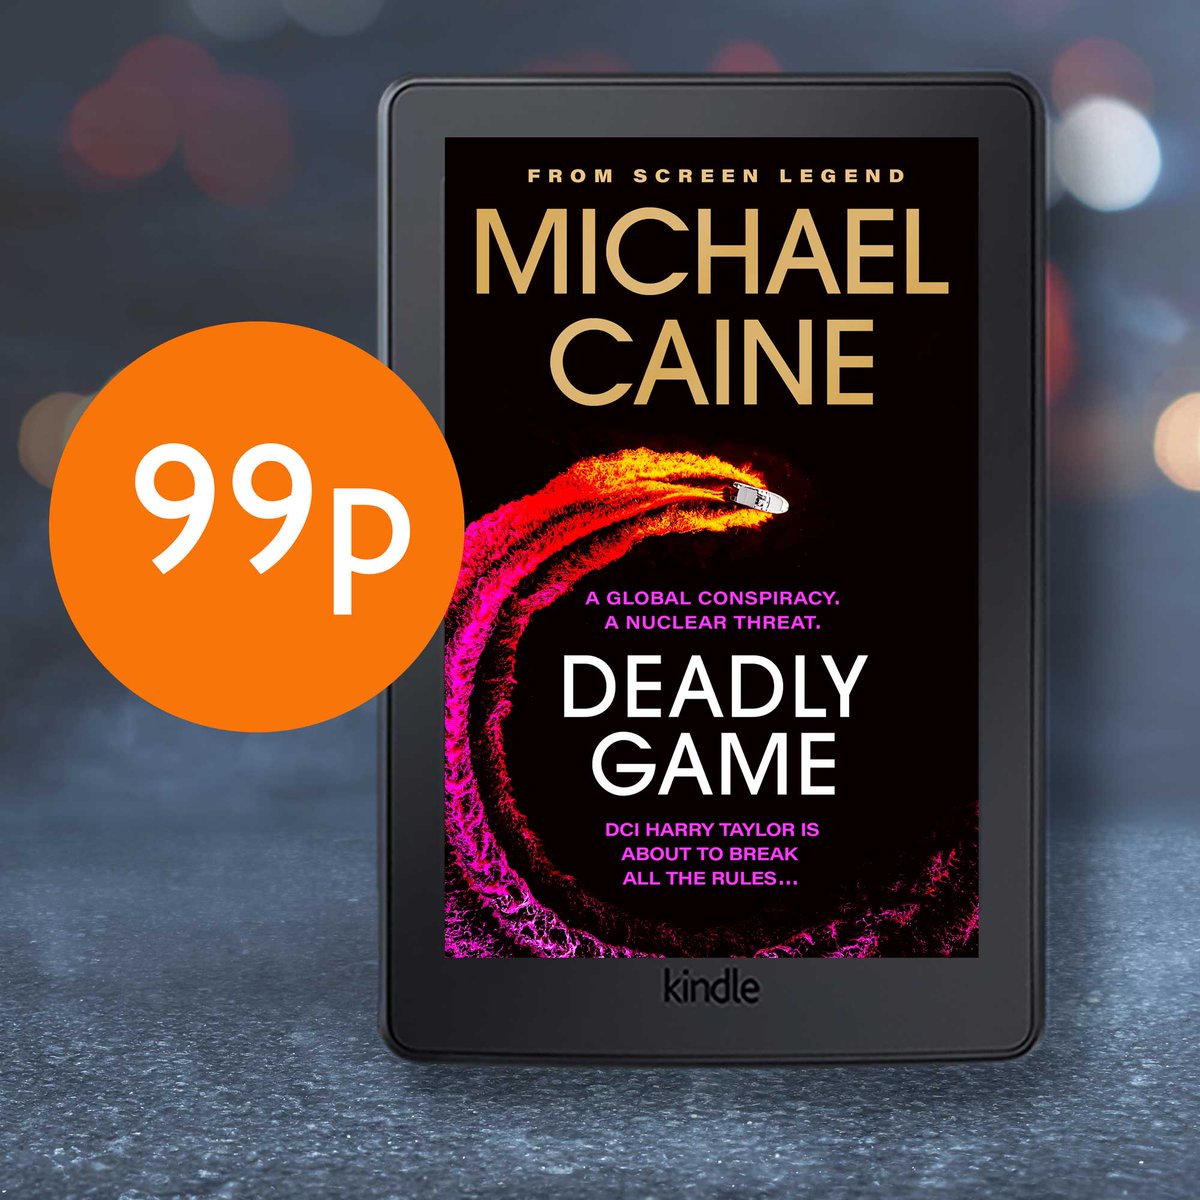 UK readers! My debut thriller novel, DEADLY GAME, is running as a @kobo Super Daily Deal and is 99p in ebook across all retailers, but only for a short time. Don't miss out: kobo.com/gb/en/ebook/de…